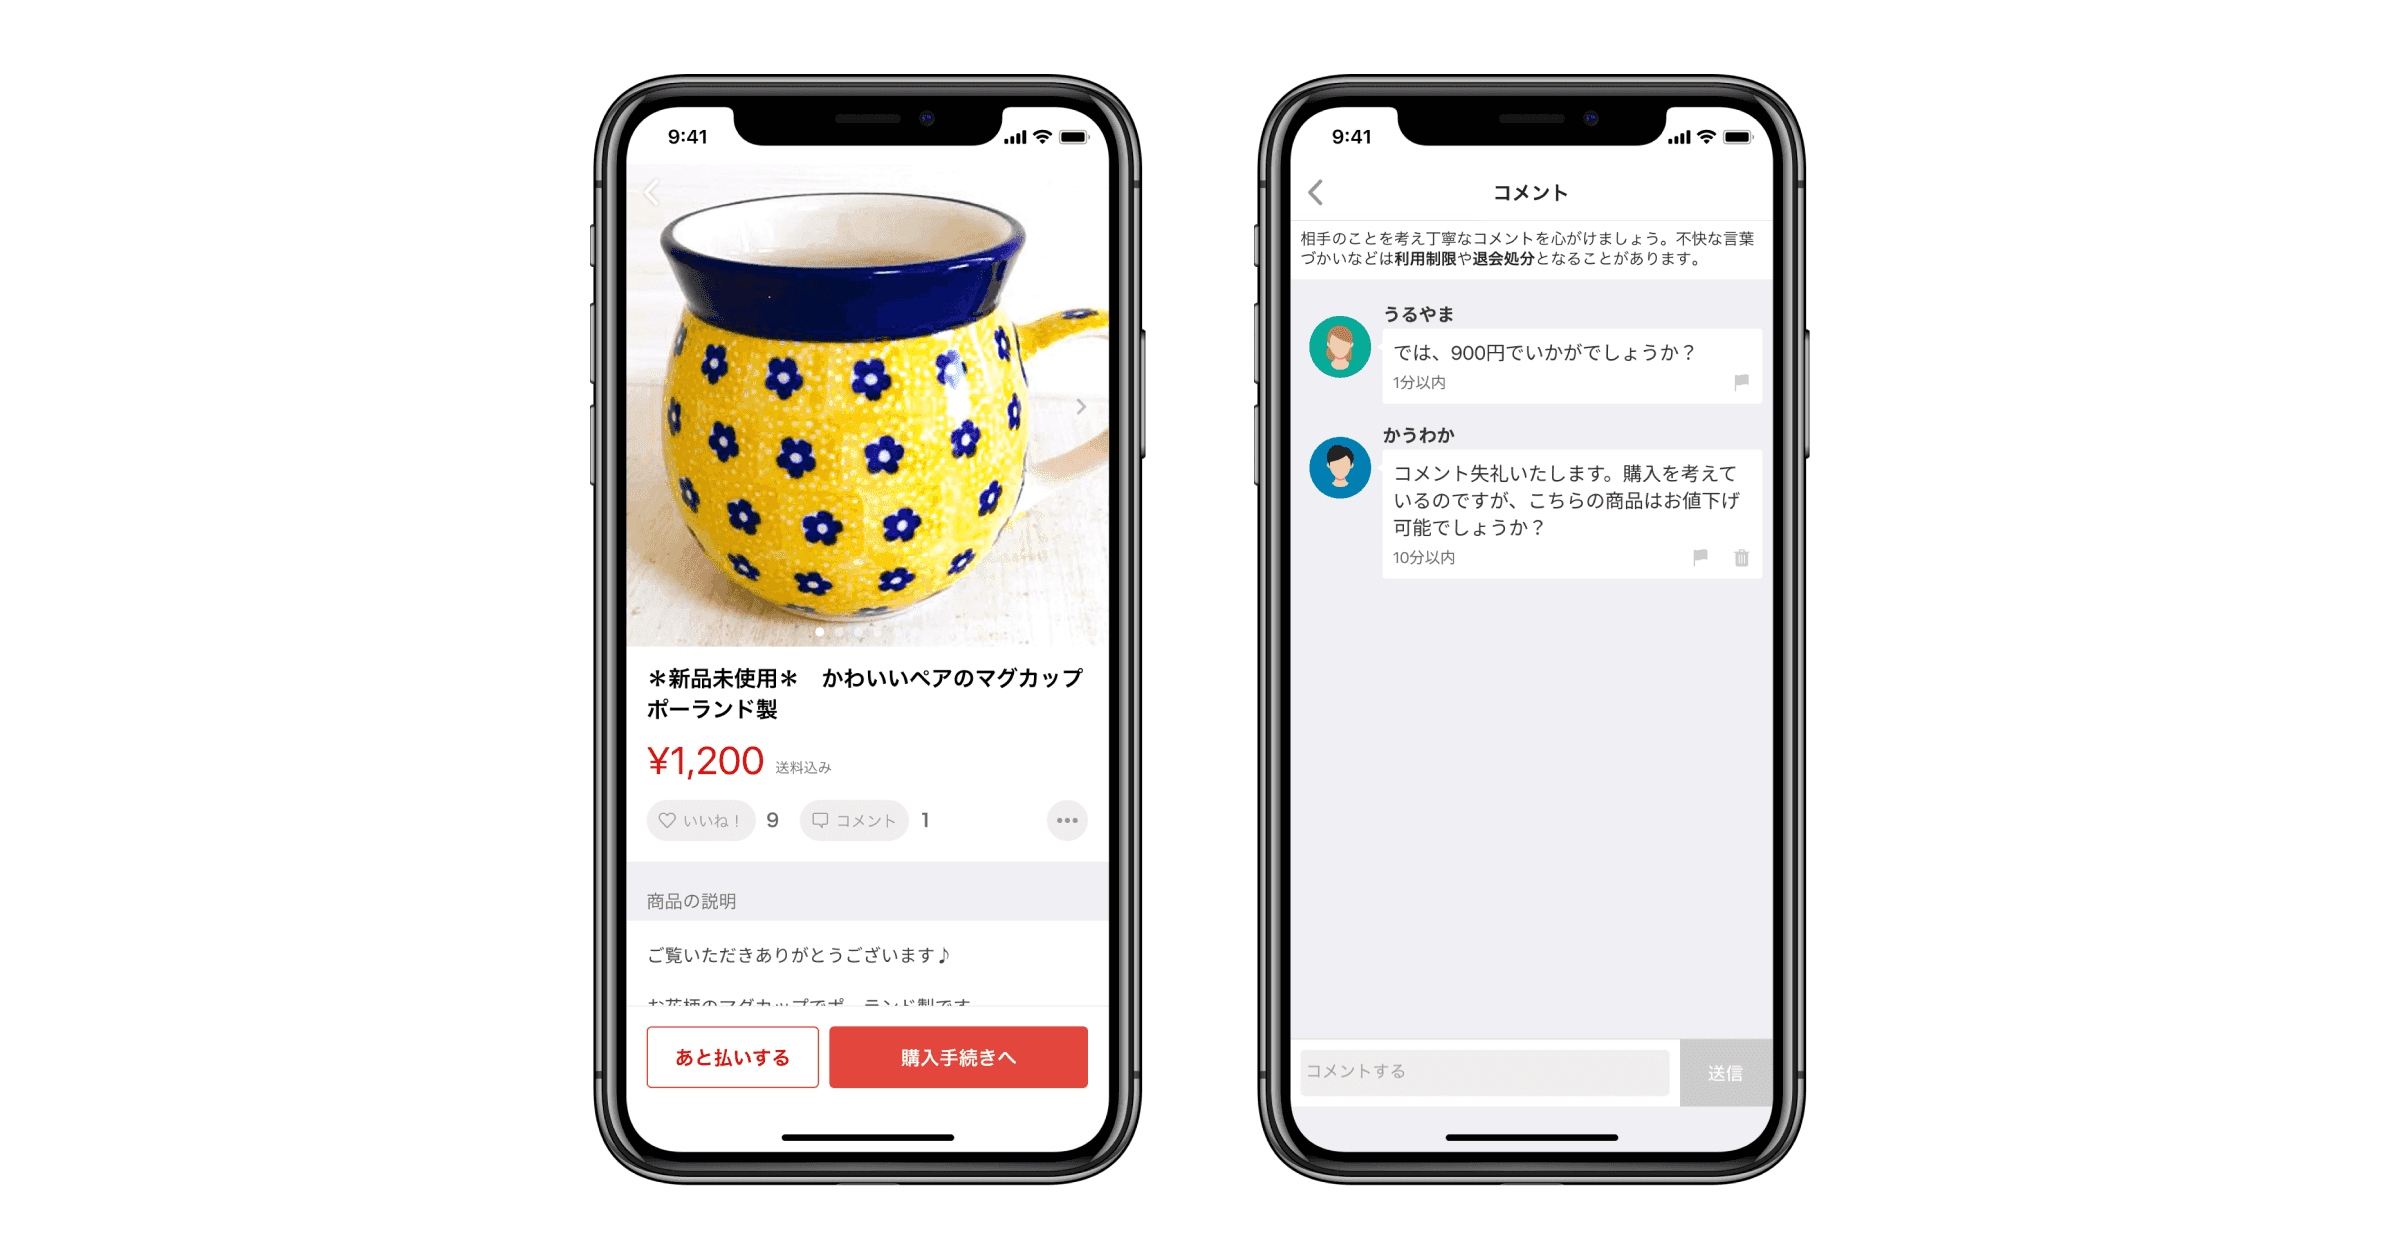 Starting to Provide Listing Data From the Mercari Marketplace App